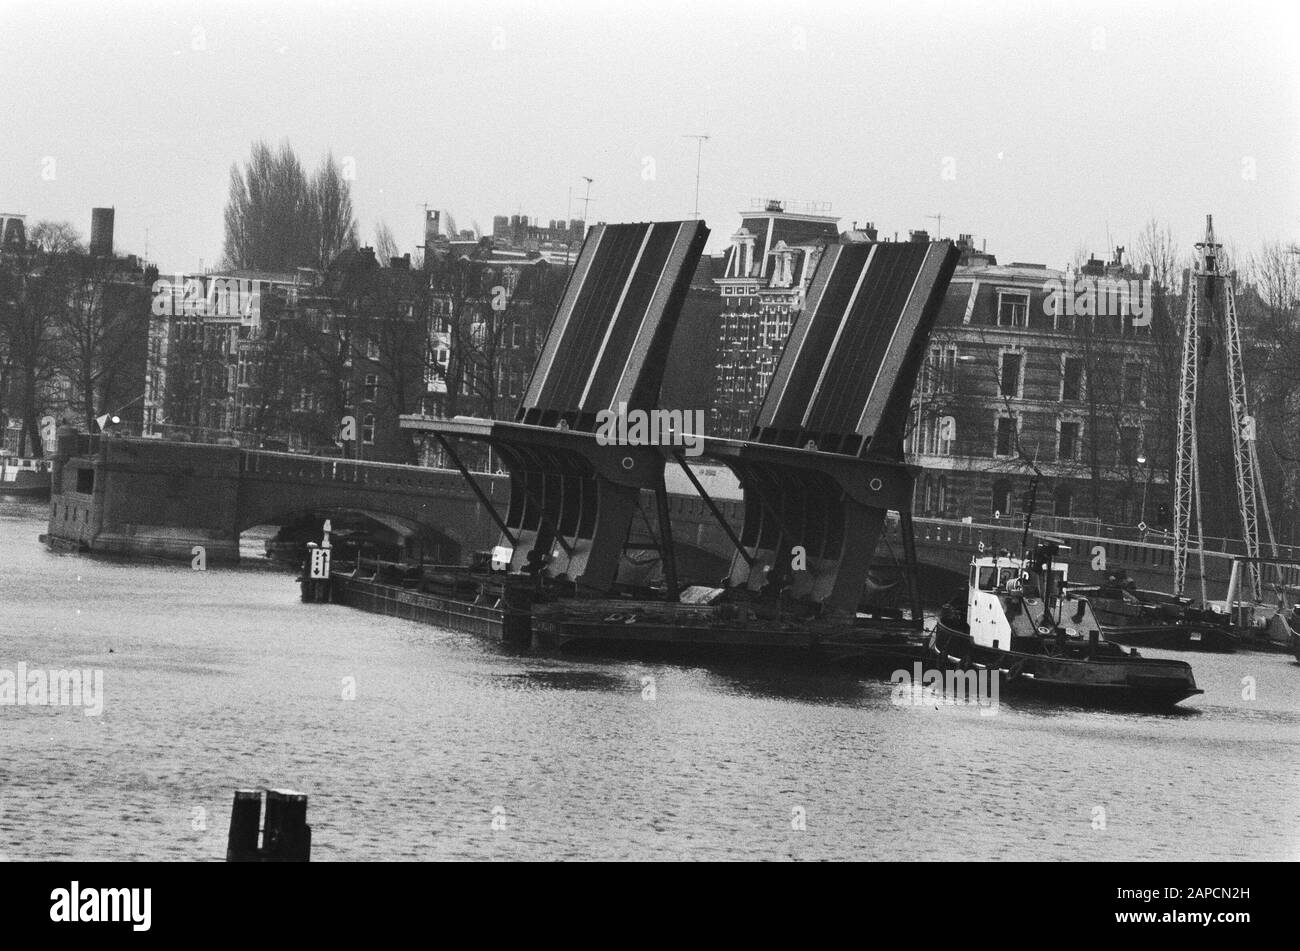 Supply of steel movable bridge parts for the Nieuwe Amstel bridge over the Amstel Date: January 18 1986 Location: Amsterdam, Noord-Holland Keywords: amstel, bridges Stock Photo